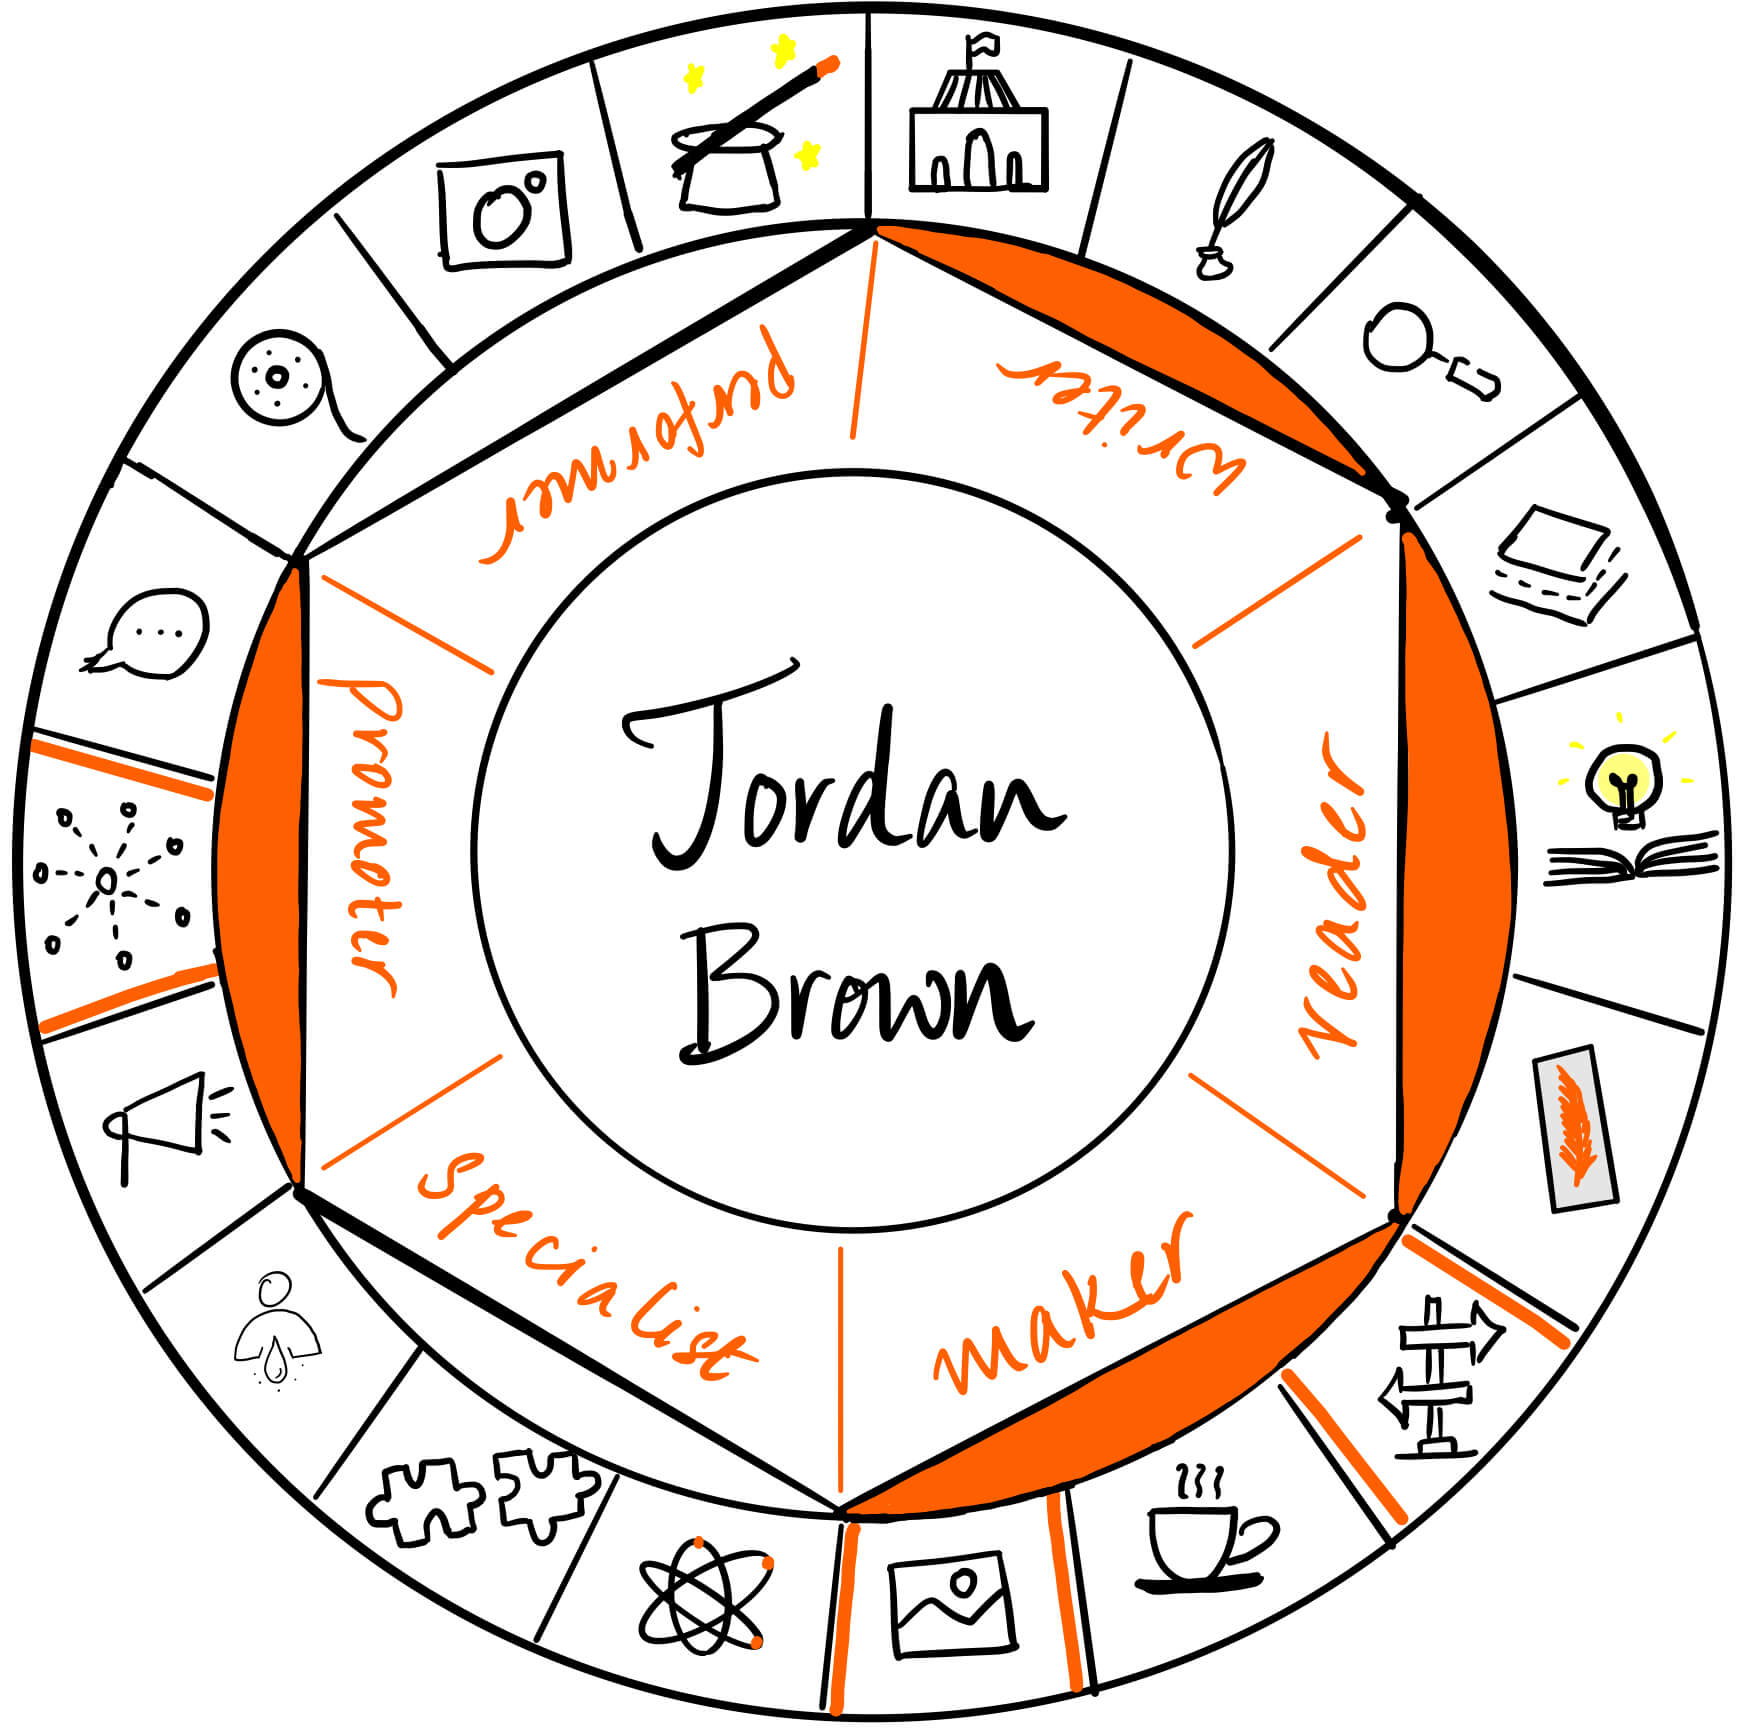 Jordan Brown is a writer, reader, maker and promoter. It's a pleasure to have him over on The Creator's Roulette to talk about his journey in mental health.